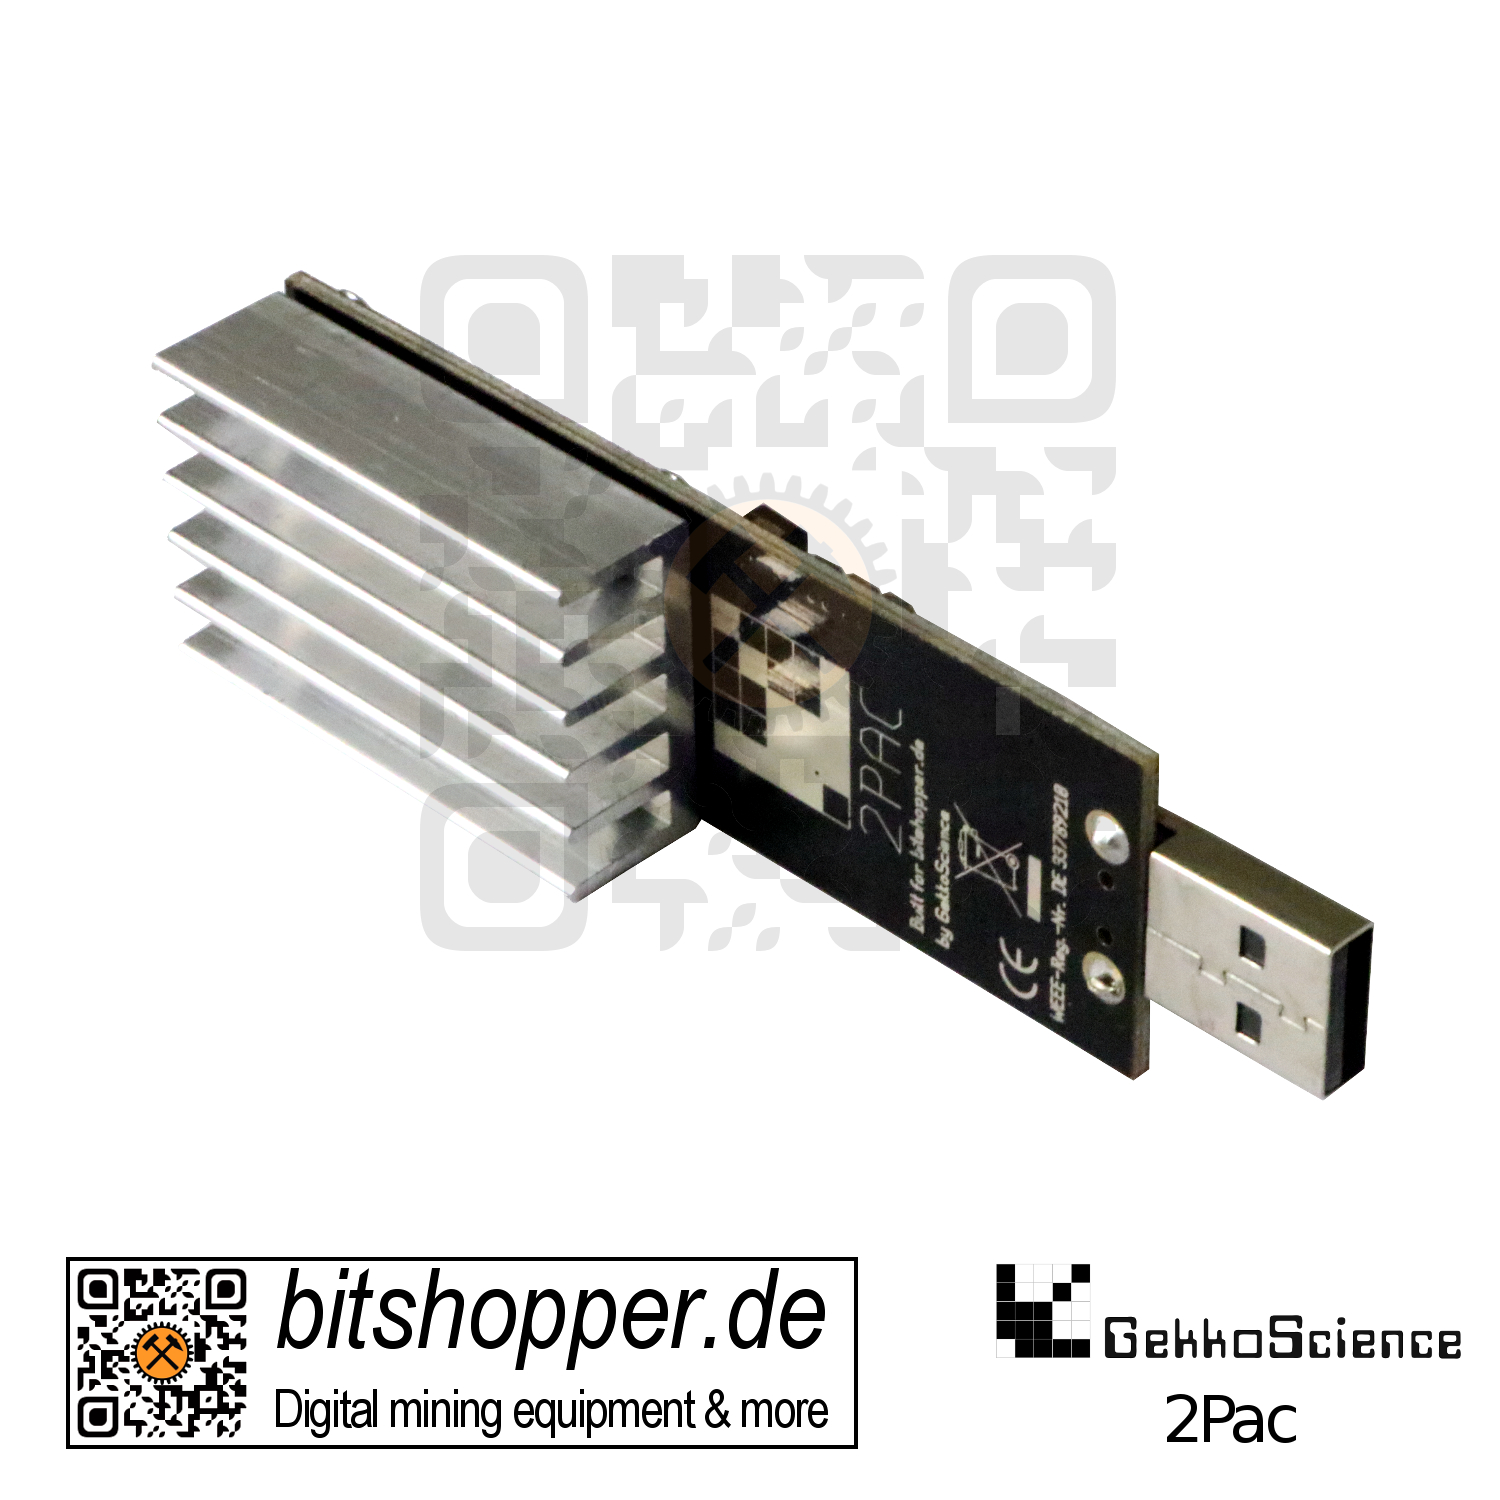 99 Usb Asic Bitcoin Miner Images, Stock Photos, 3D objects, & Vectors | Shutterstock